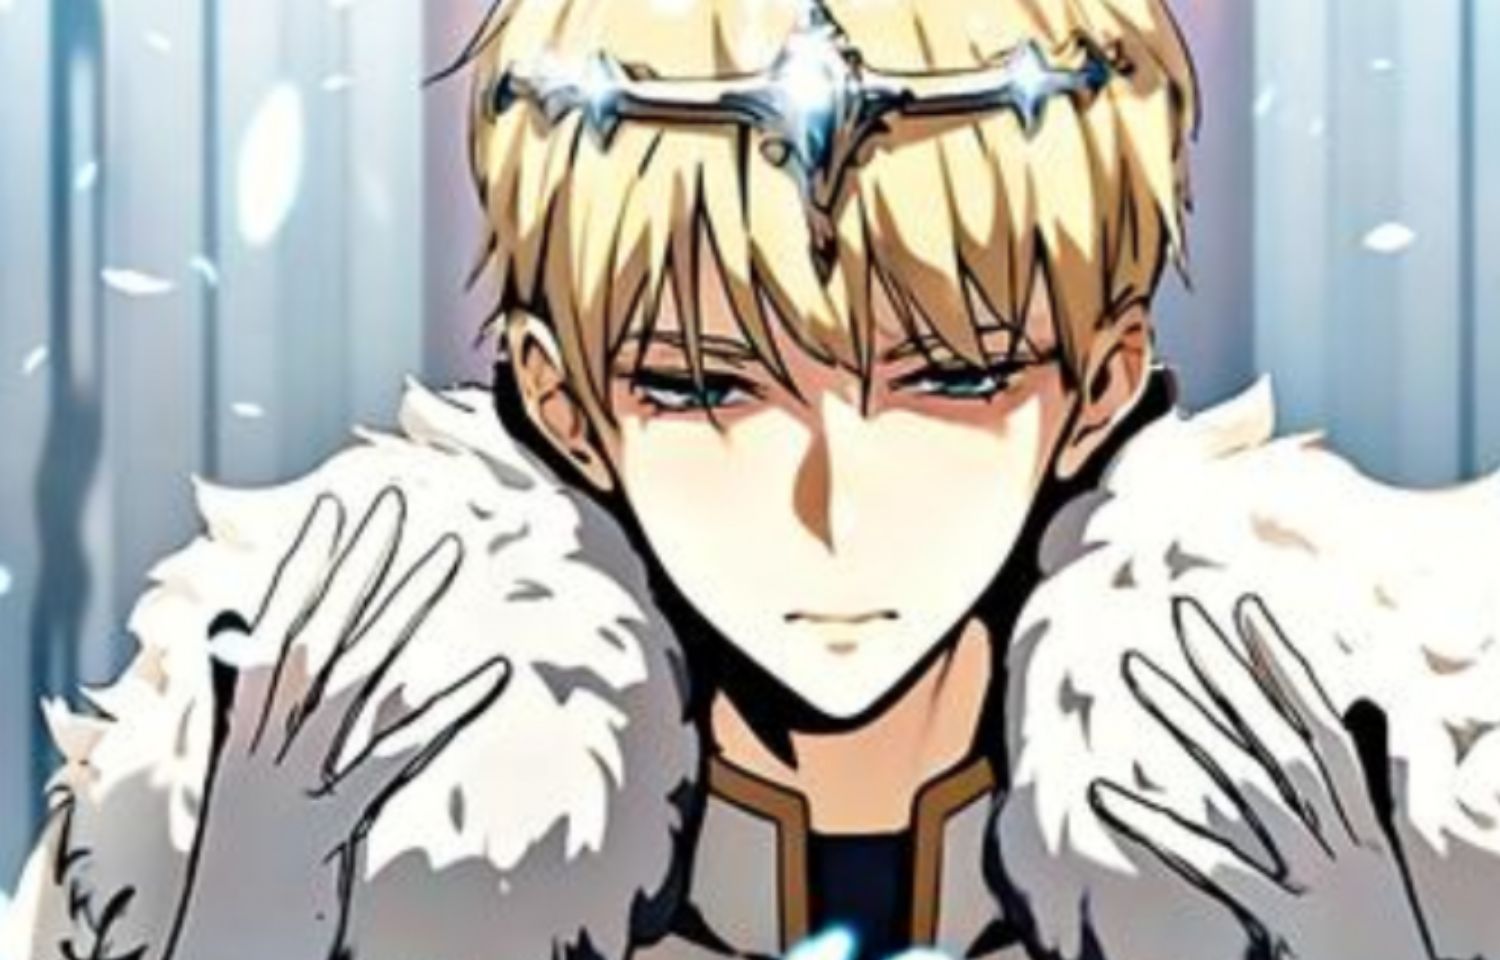 The Knight King Who Returned with a God Chapter 39 Release Date